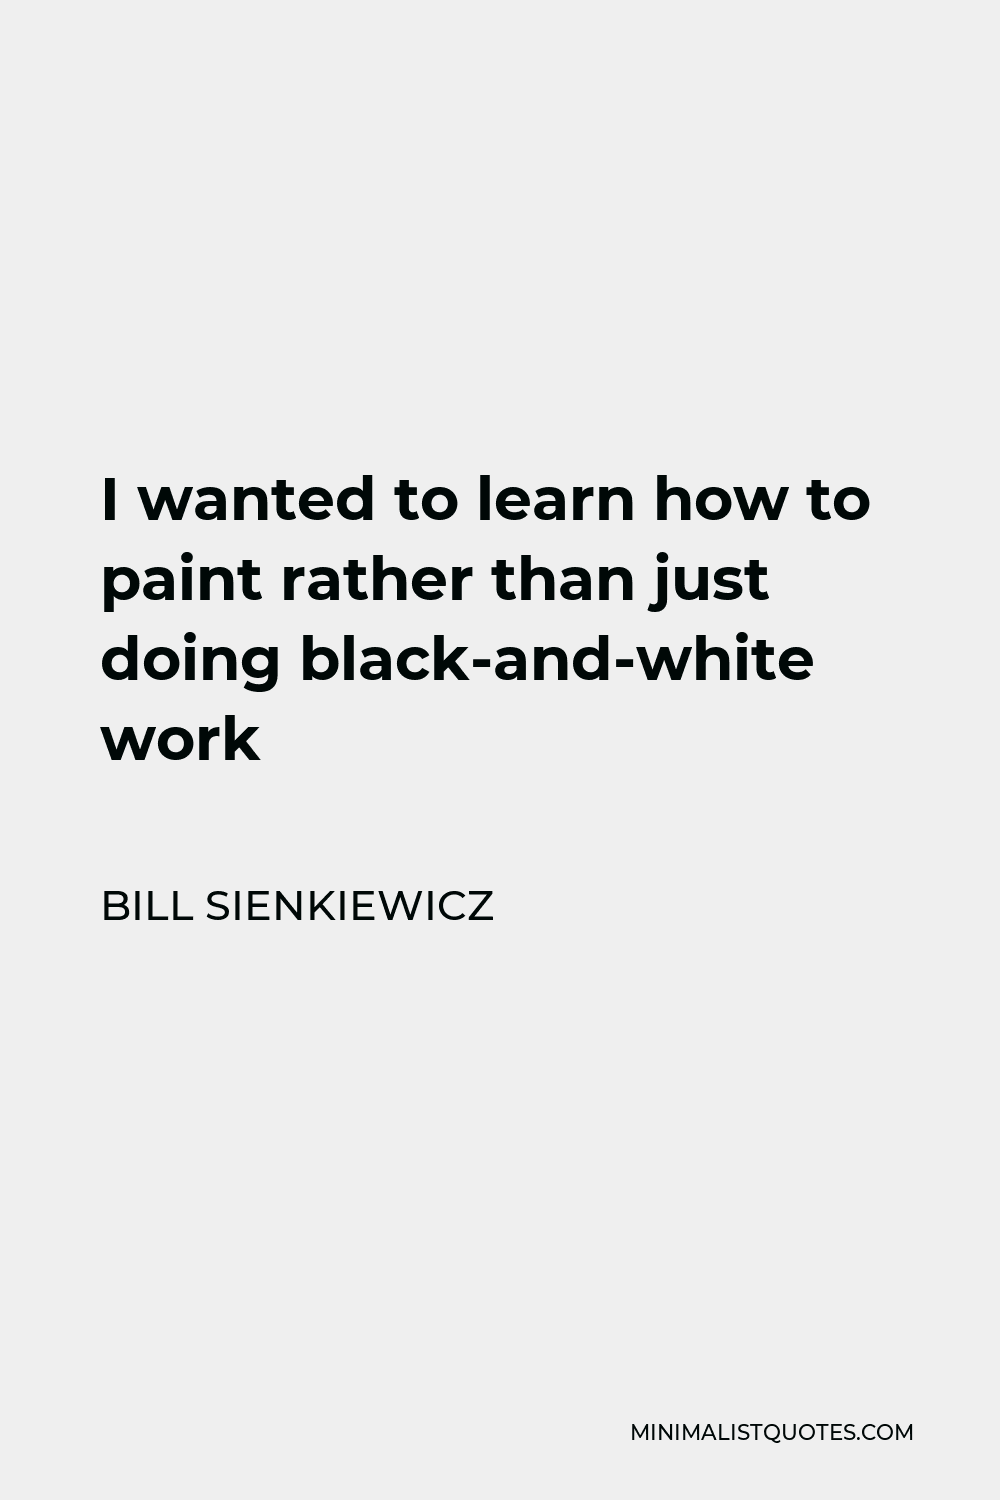 Bill Sienkiewicz Quote - I wanted to learn how to paint rather than just doing black-and-white work